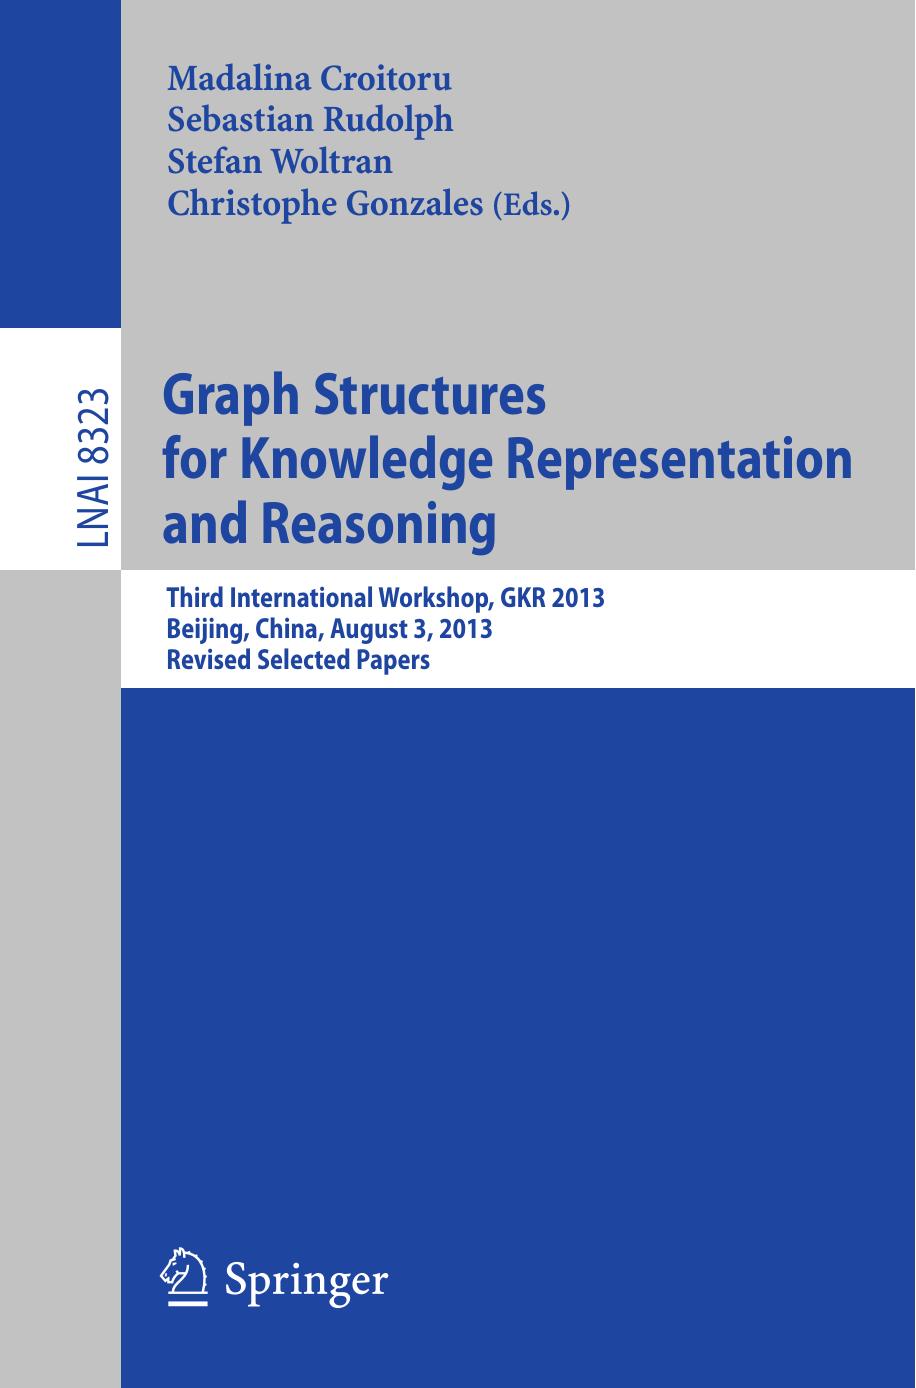 Graph Structures for Knowledge Representation and Reasoning: Third International Workshop, GKR 2013, Beijing, China, August 3, 2013. Revised Selected Papers